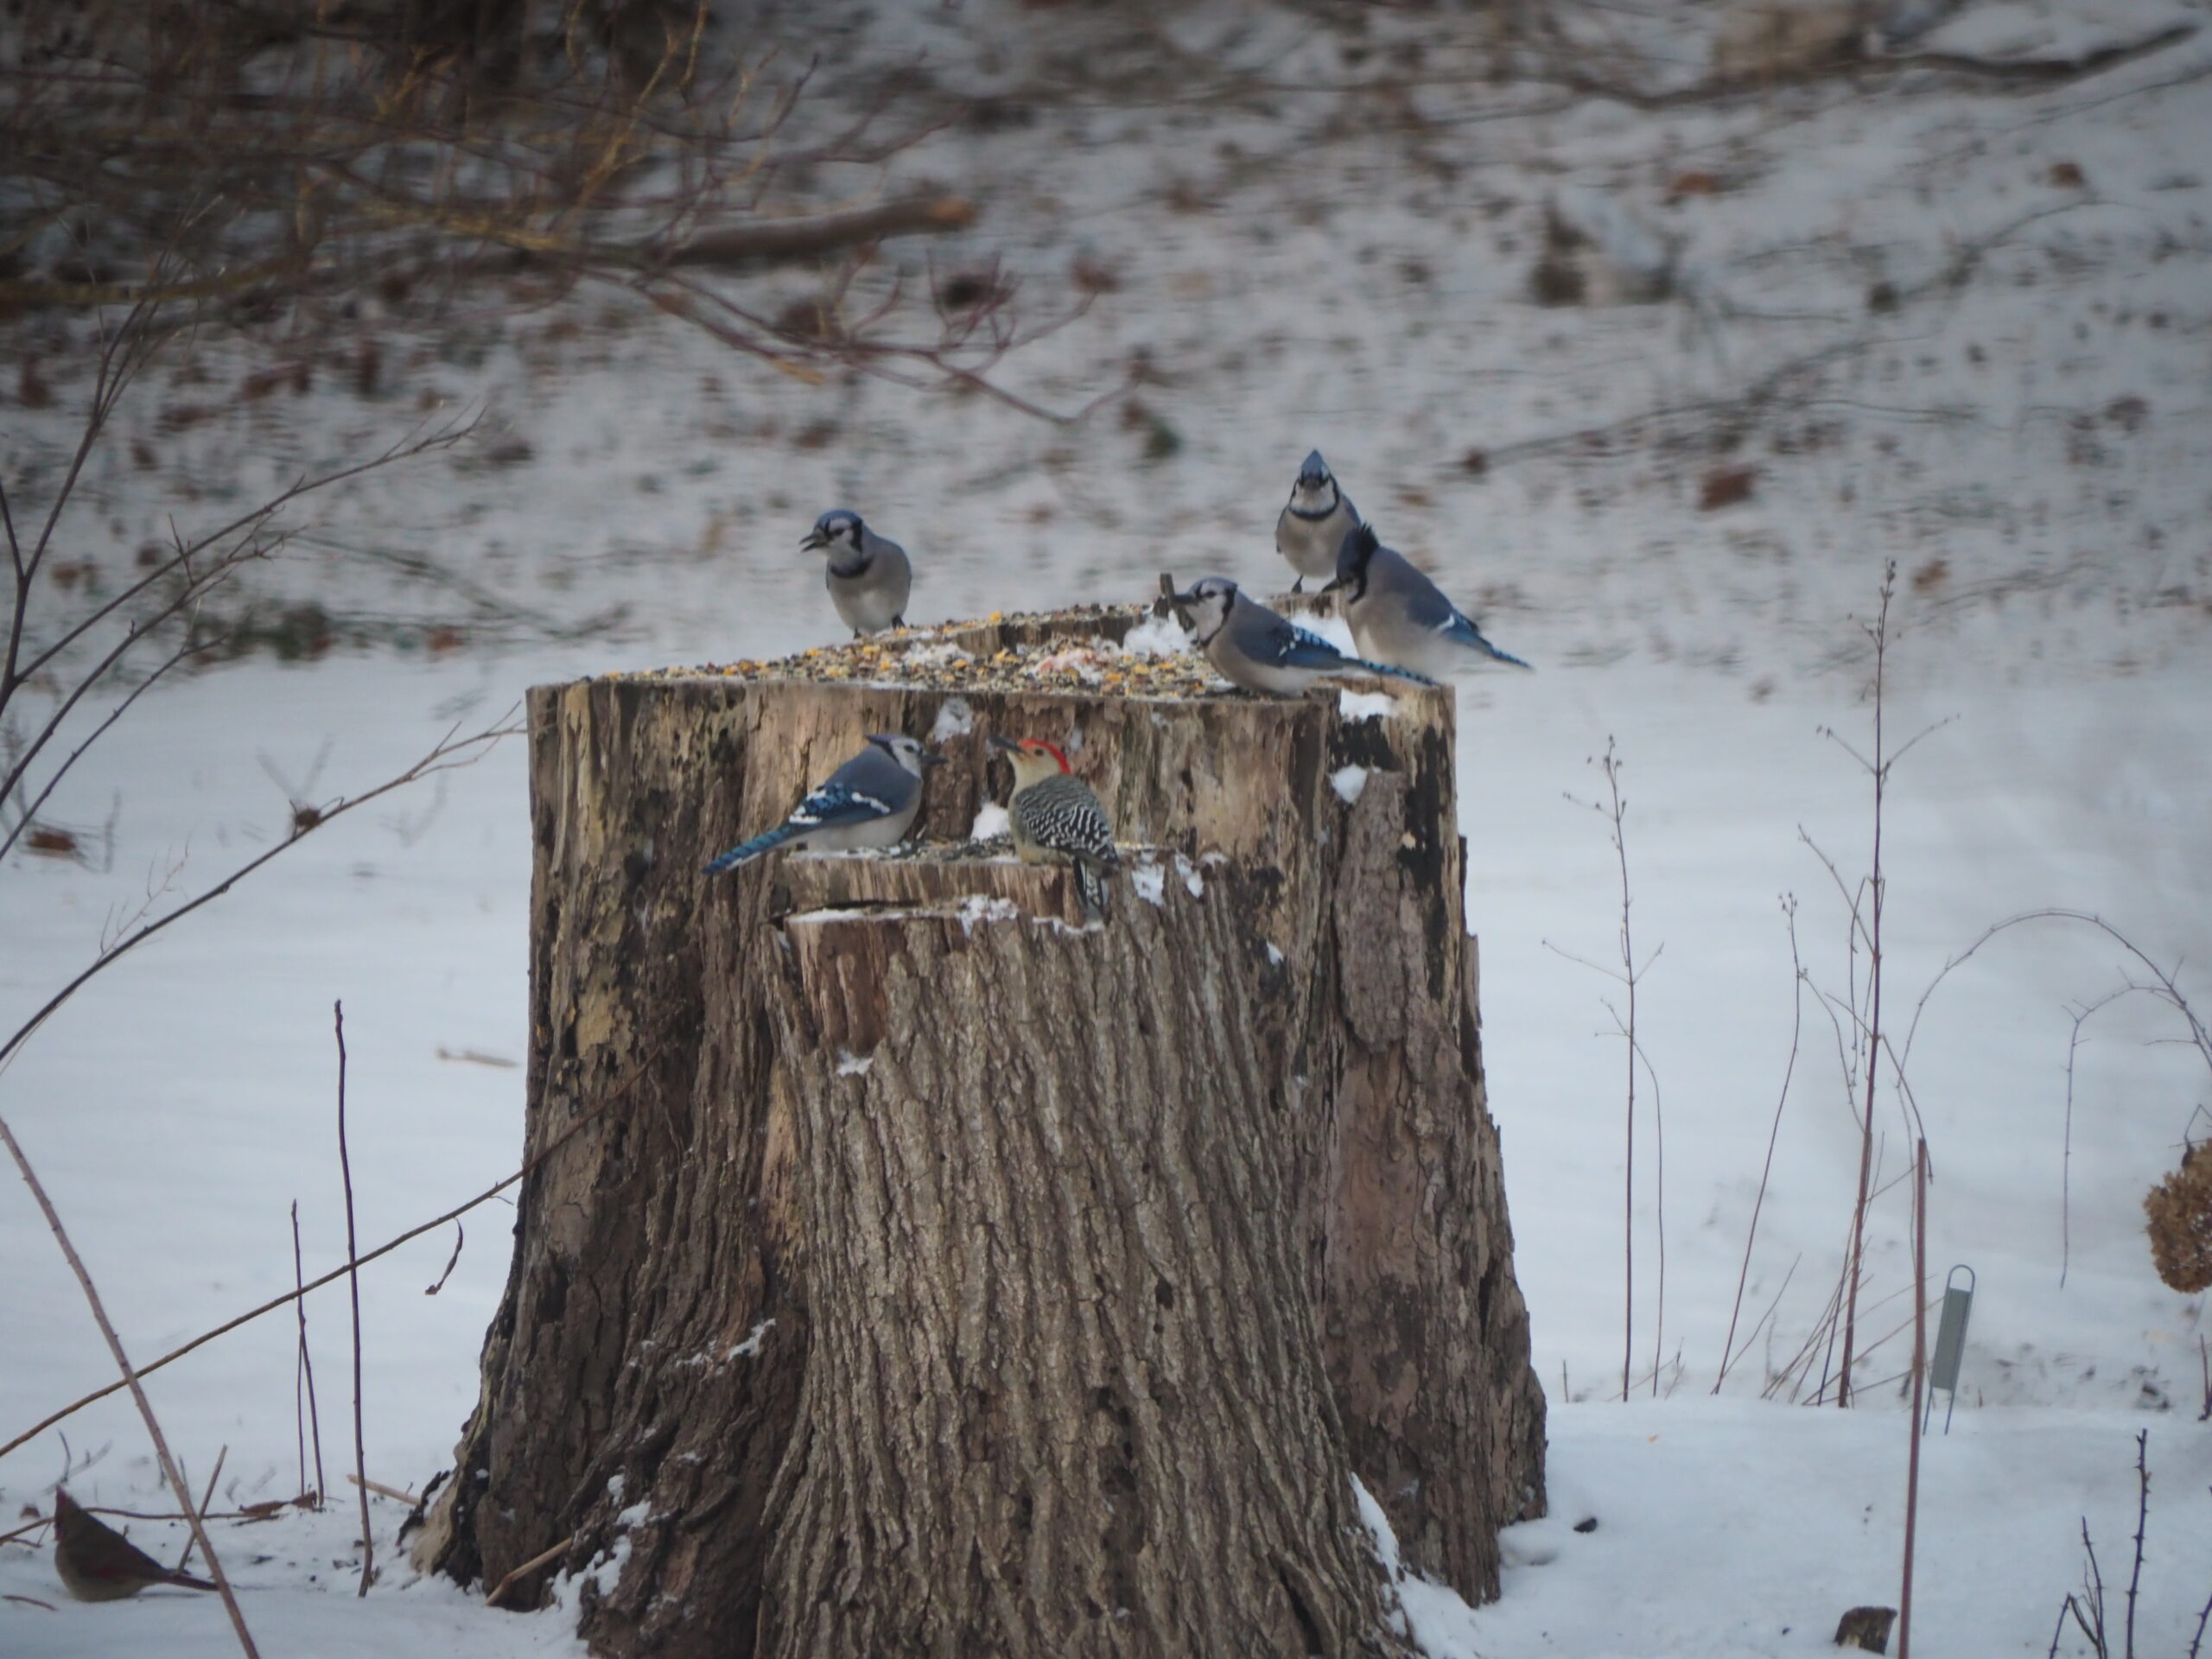 A red-bellied woodpecker takes a break from feeding on ash borer grubs and joins the blue jays at the stump to check out the offerings. ANDREW MESSINGER